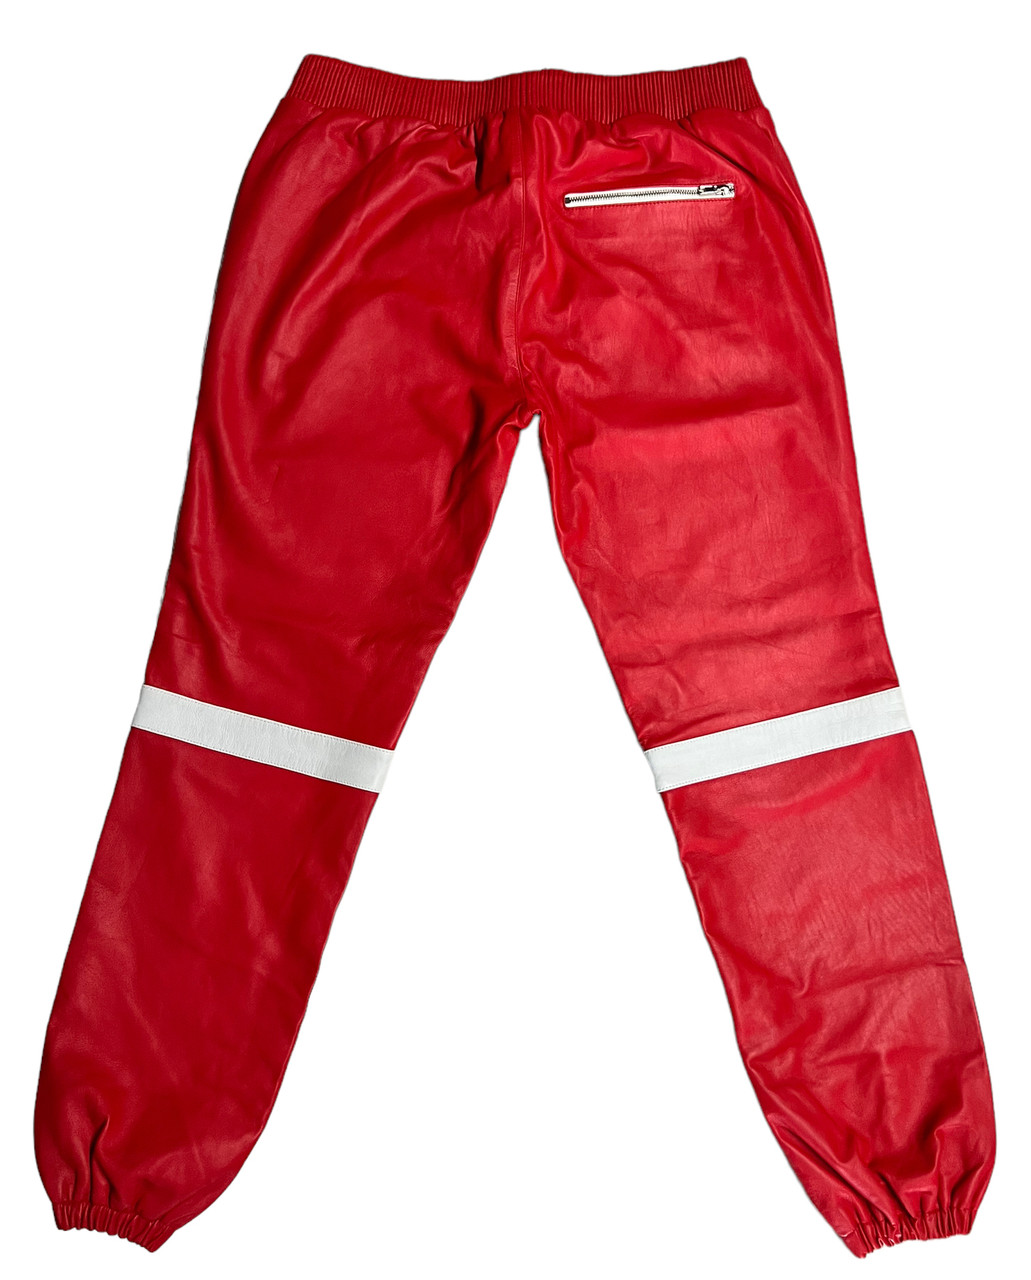 https://cdn11.bigcommerce.com/s-uuik8n4qcj/images/stencil/1280x1280/products/8197/13219/Red_Leather_pants_jogging_suit___81580.1677014471.JPG?c=2?imbypass=on